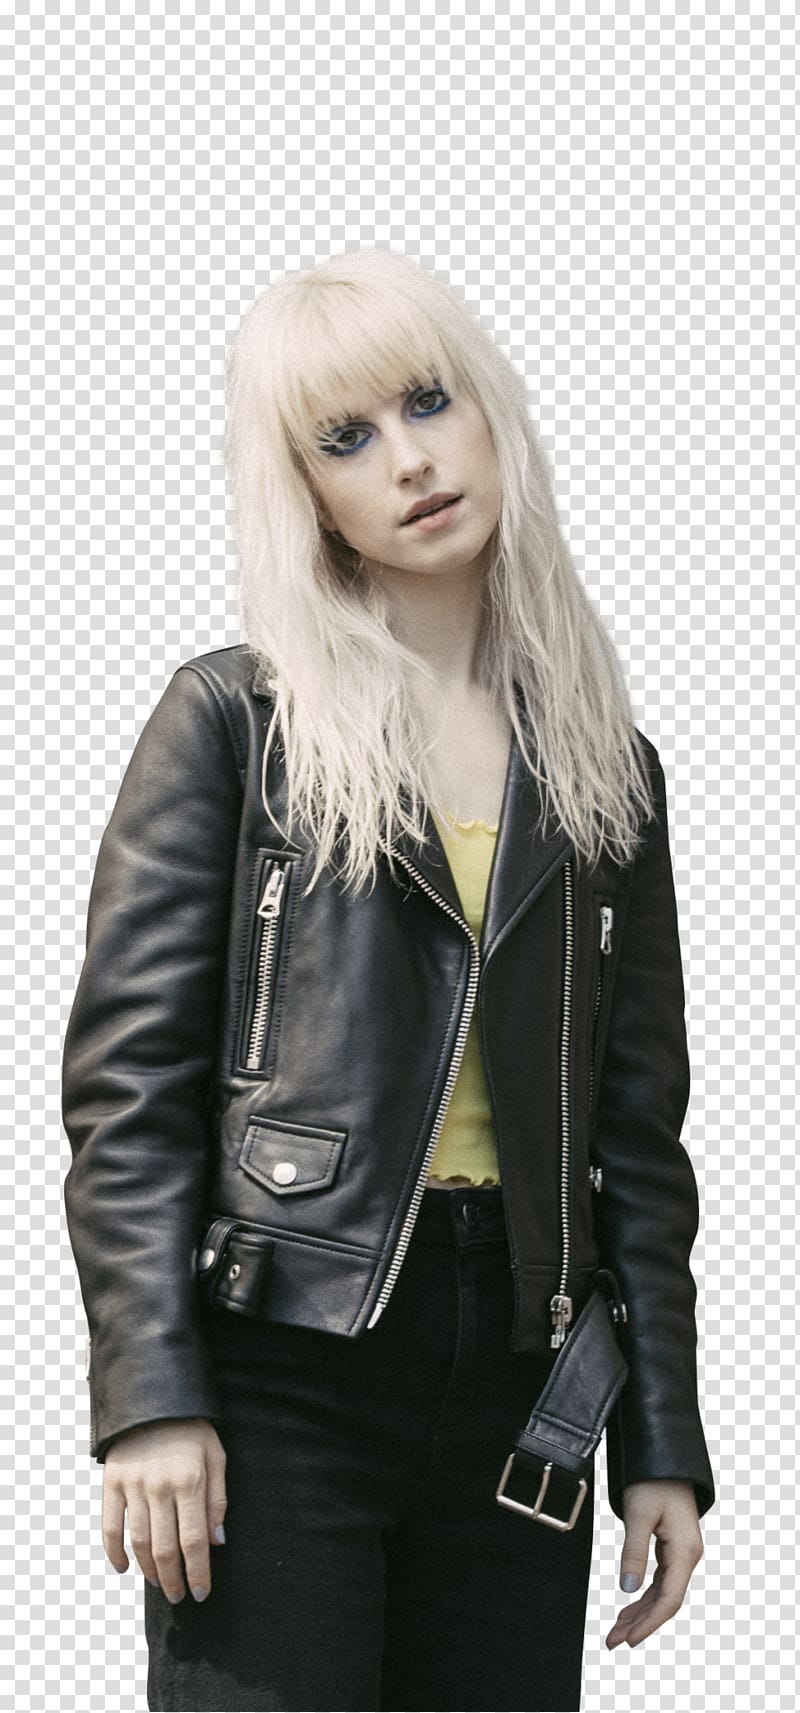 Hayley Williams Paramore HalfNoise KROQ Weenie Roast , hayley williams transparent background PNG clipart